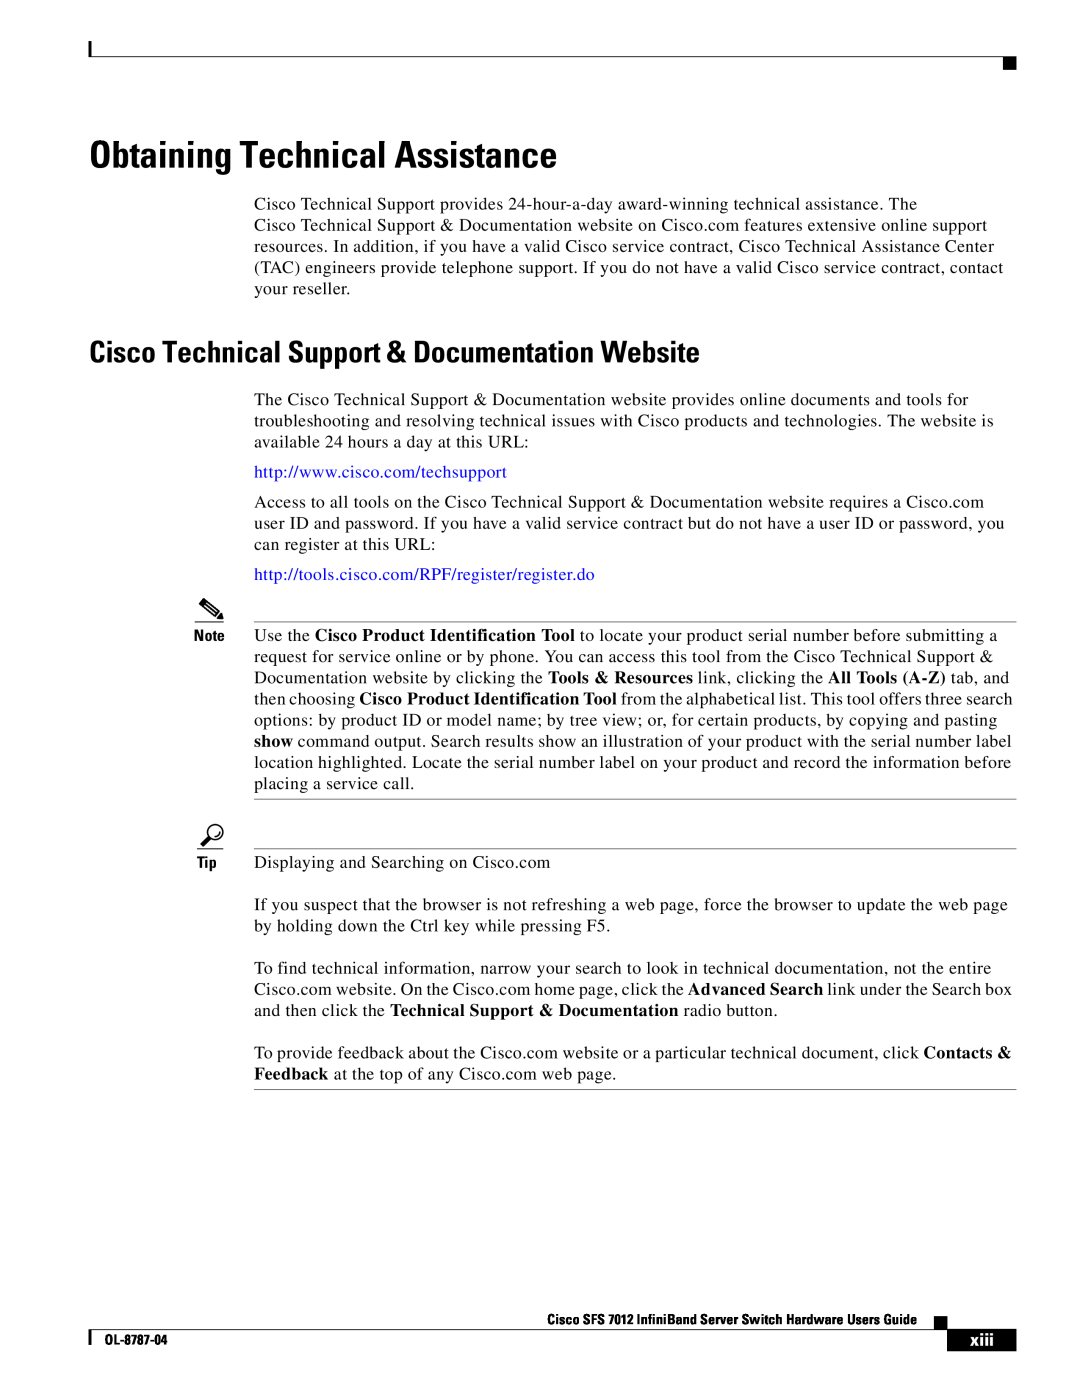 Cisco Systems SFS 7012 manual Obtaining Technical Assistance, Cisco Technical Support & Documentation Website, xiii 